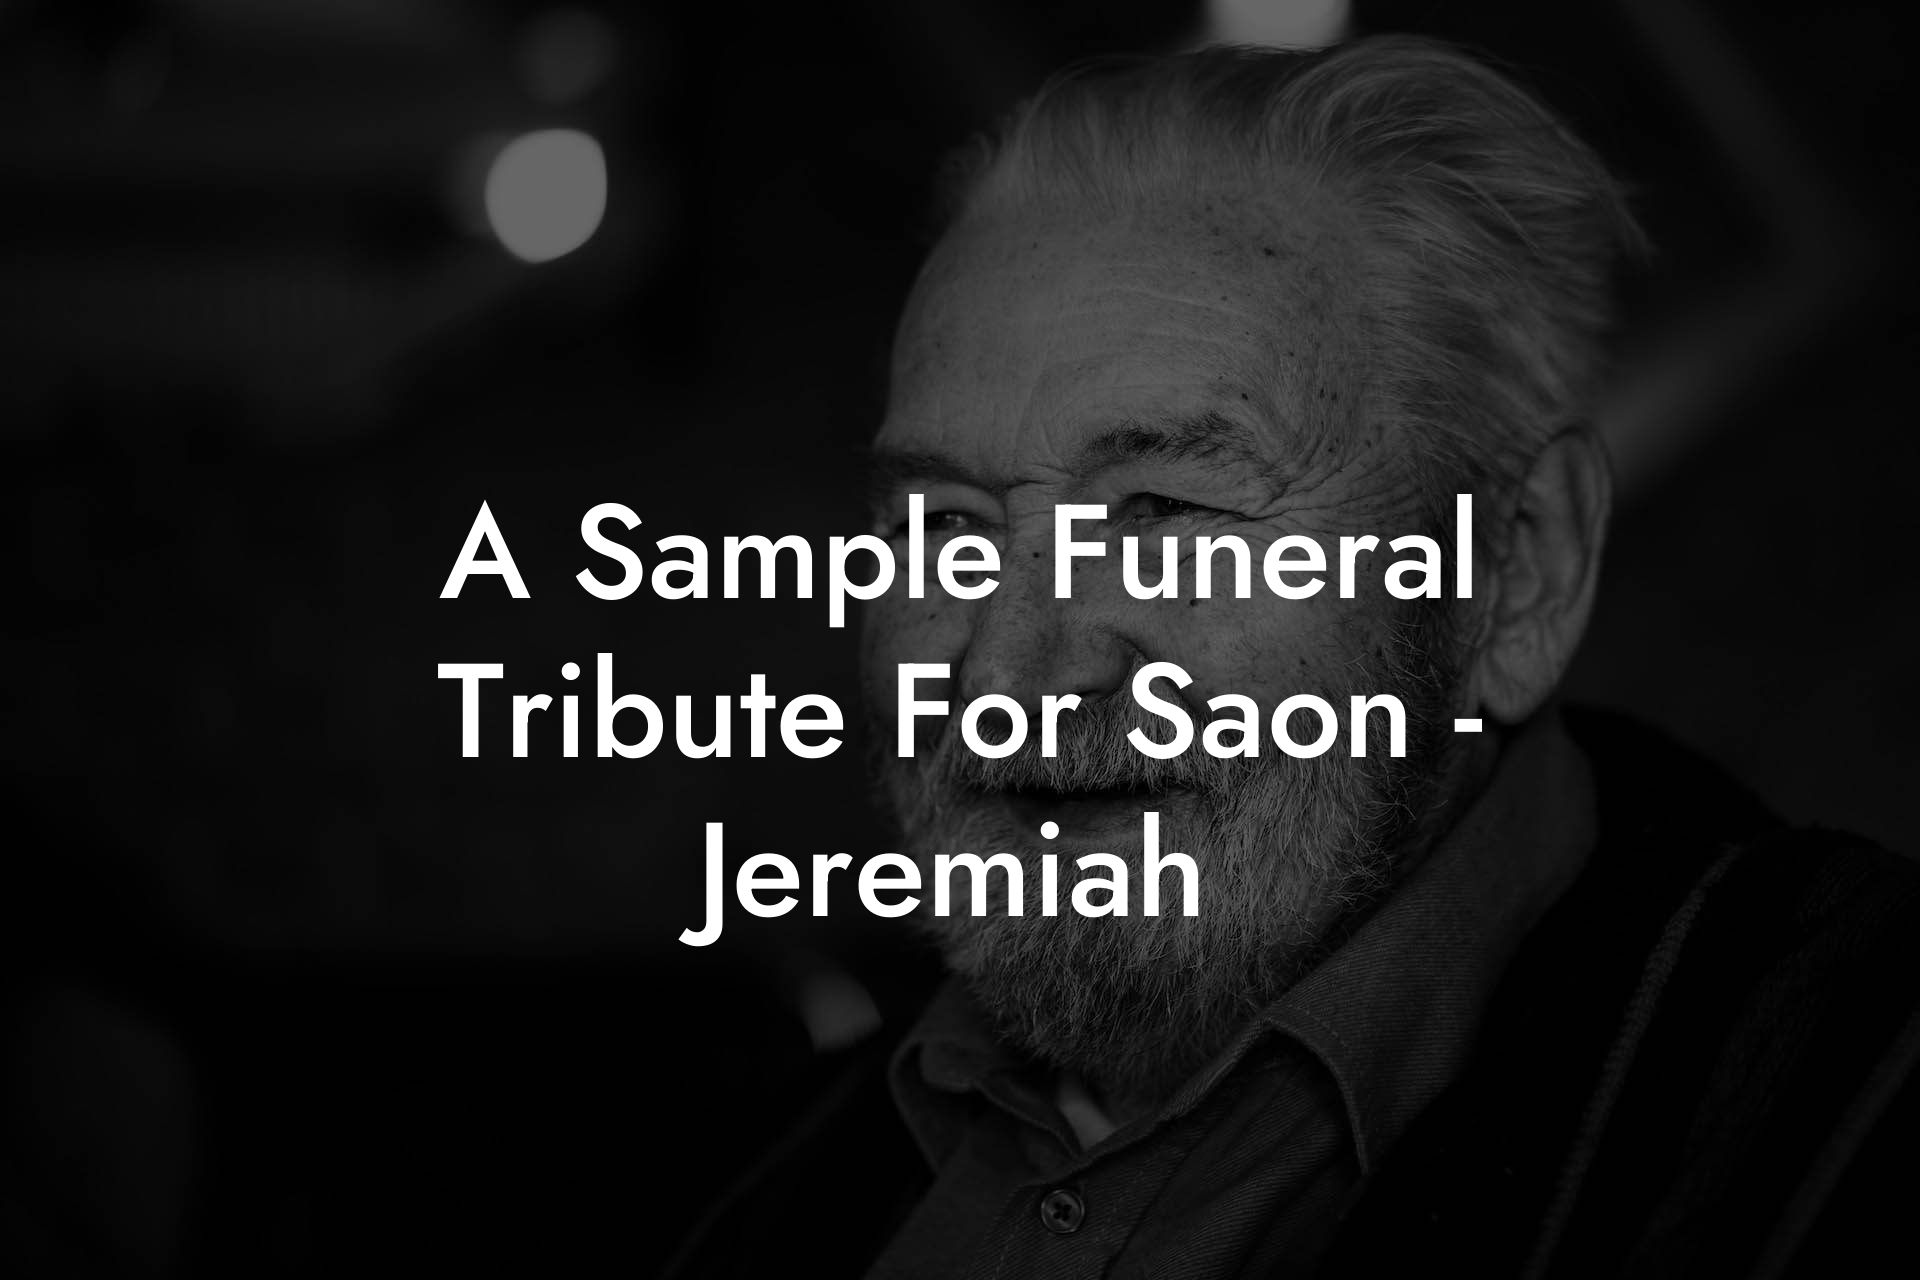 A Sample Funeral Tribute For Saon - Jeremiah